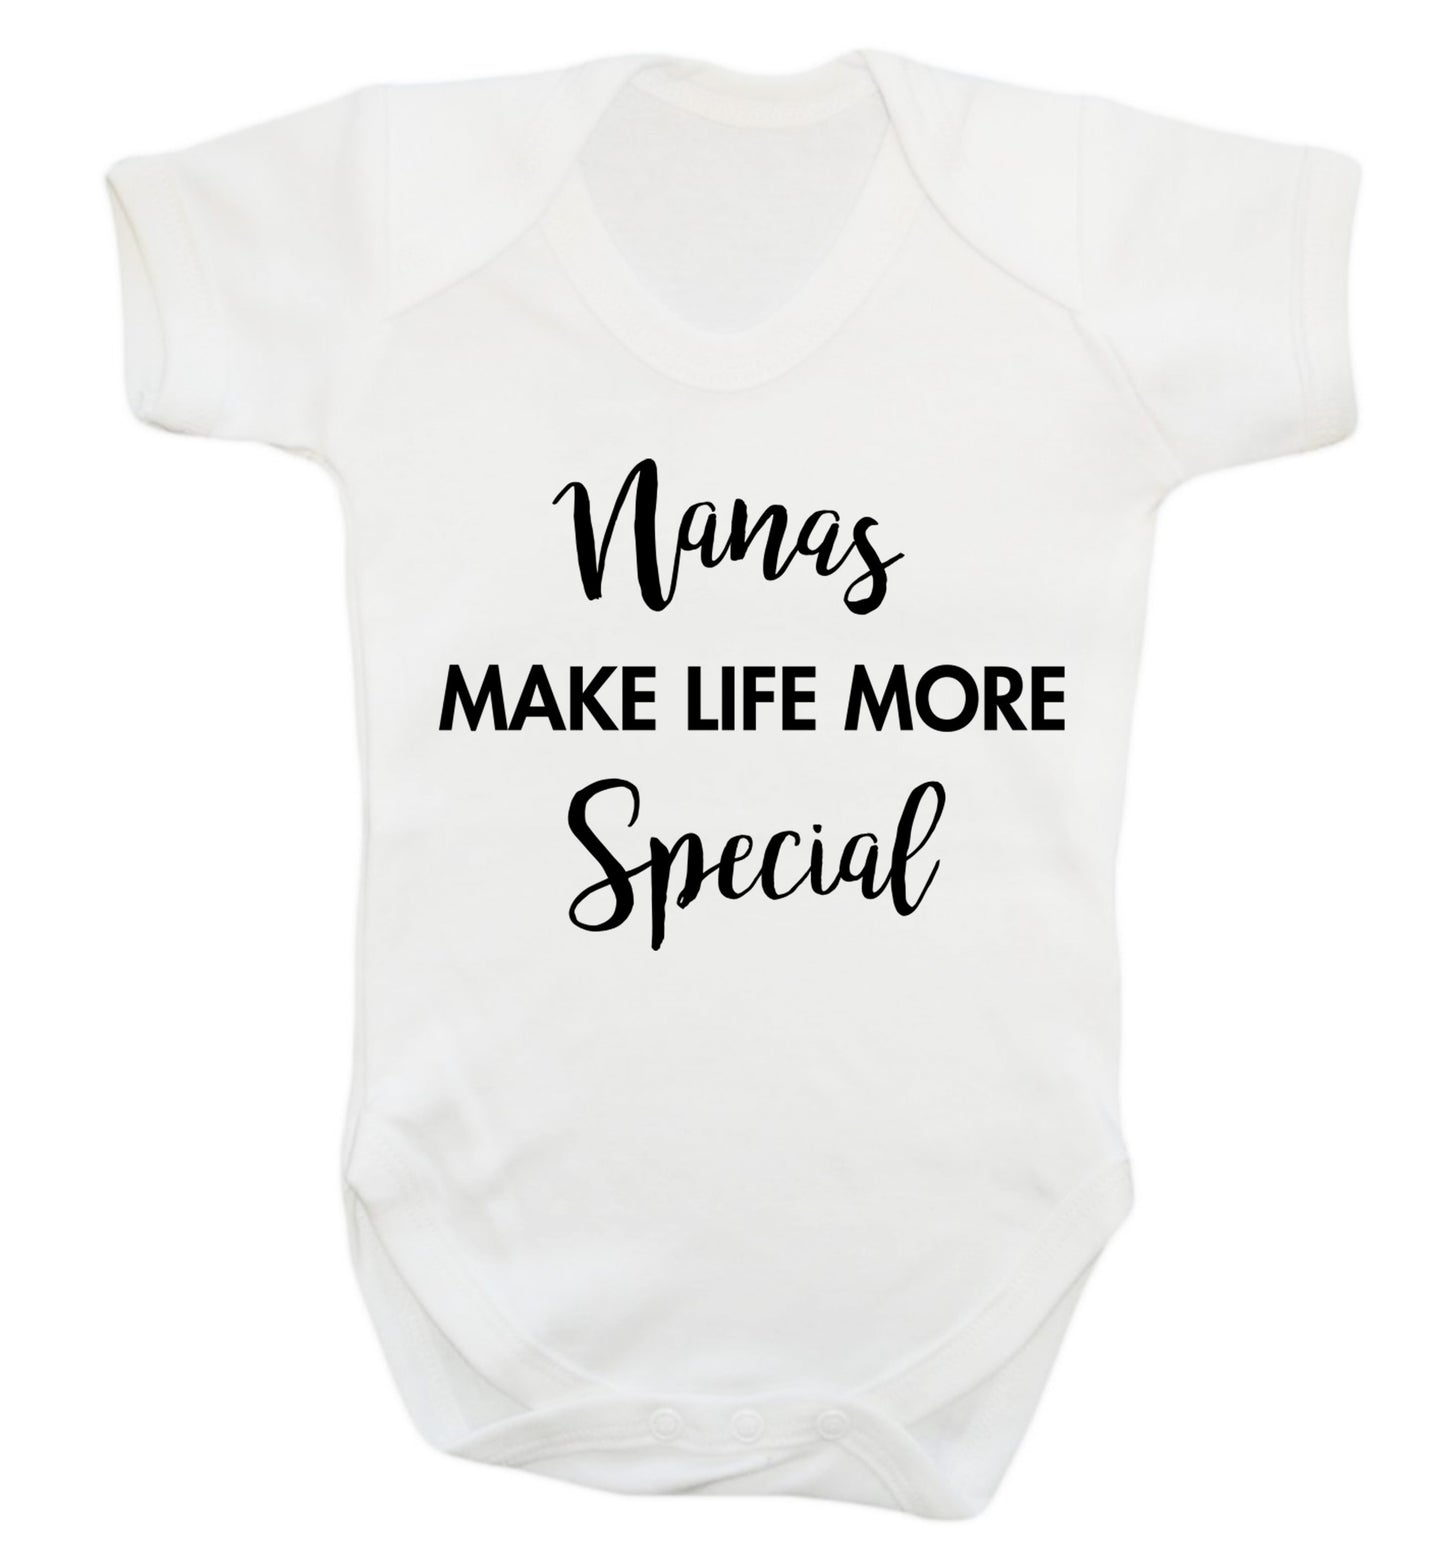 Nanas make life more special Baby Vest white 18-24 months